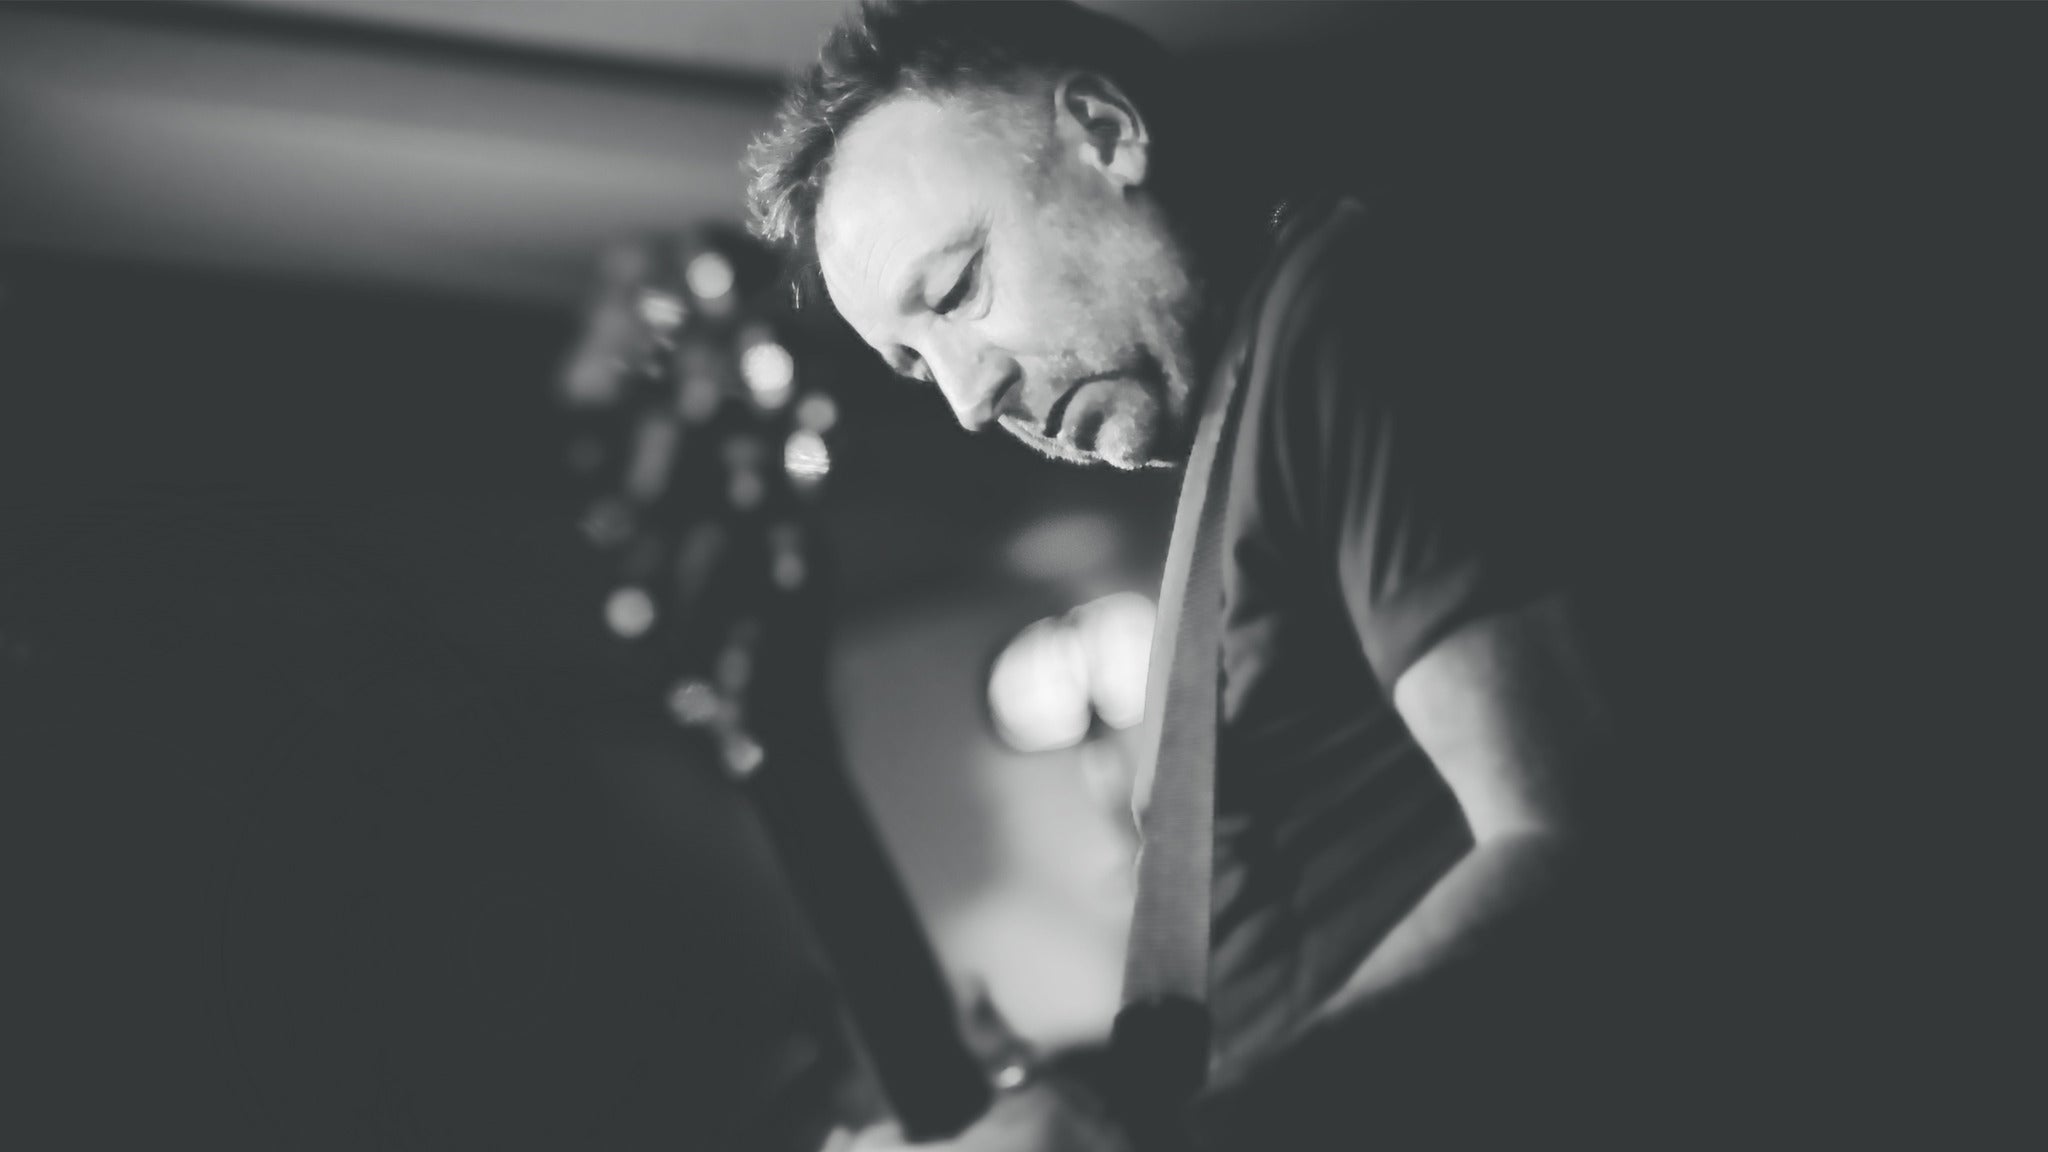 Image used with permission from Ticketmaster | PETER HOOK & THE LIGHT - JOY DIVISION: A CELEBRATION tickets